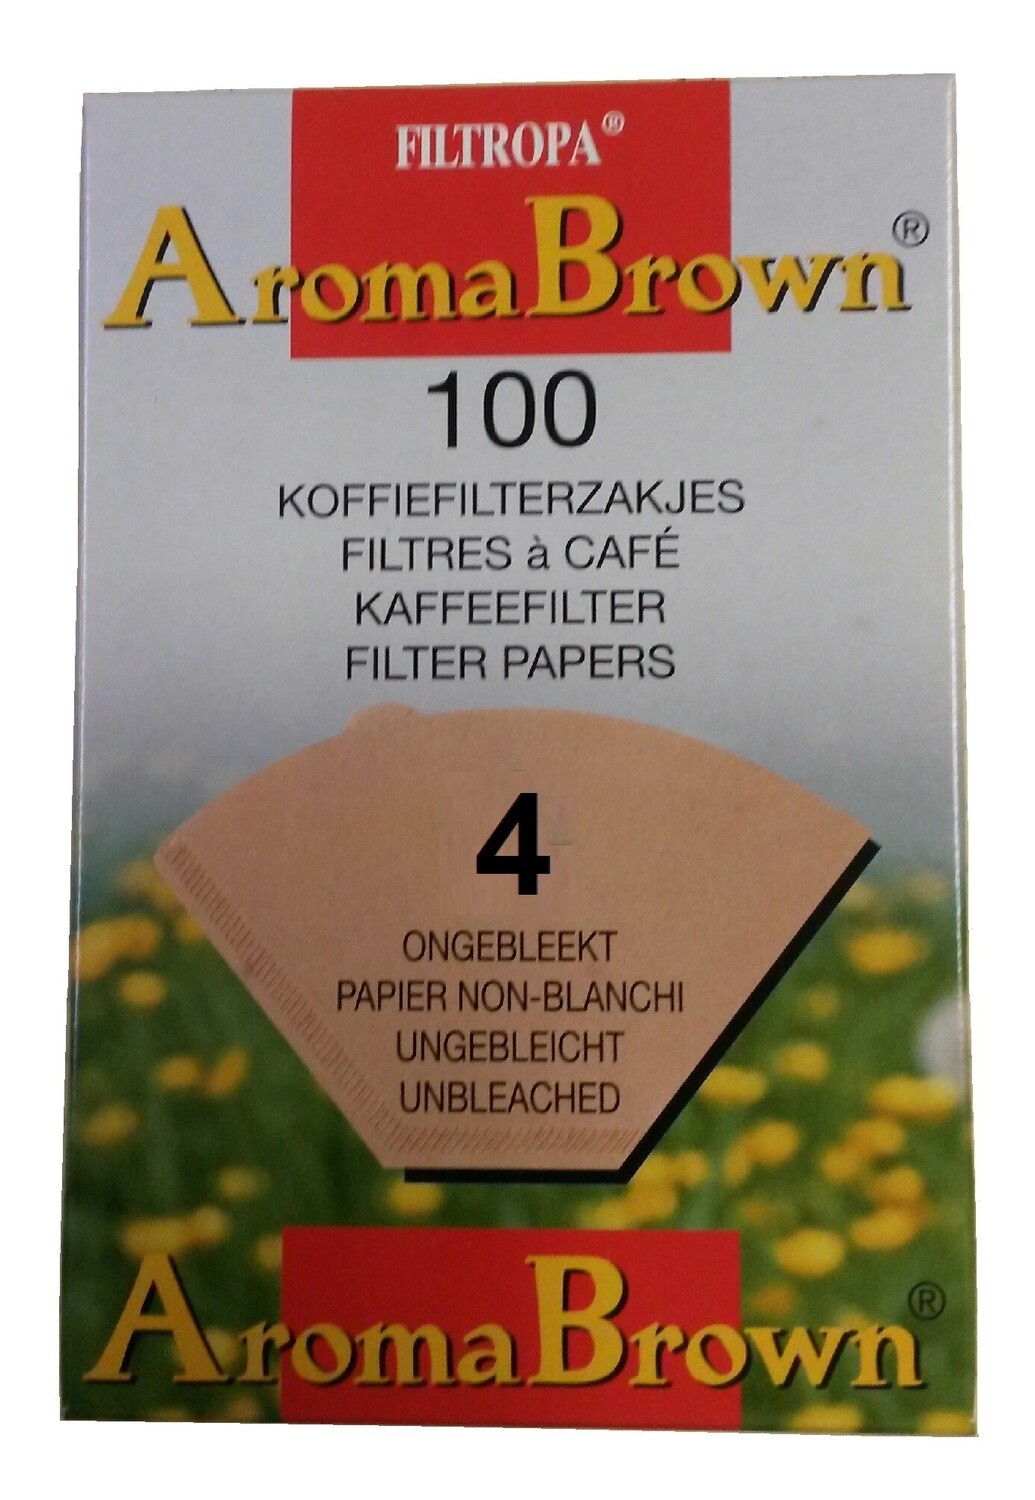 Filtropa Natural Brown Filters #4, 100 count box, 30 box CASE